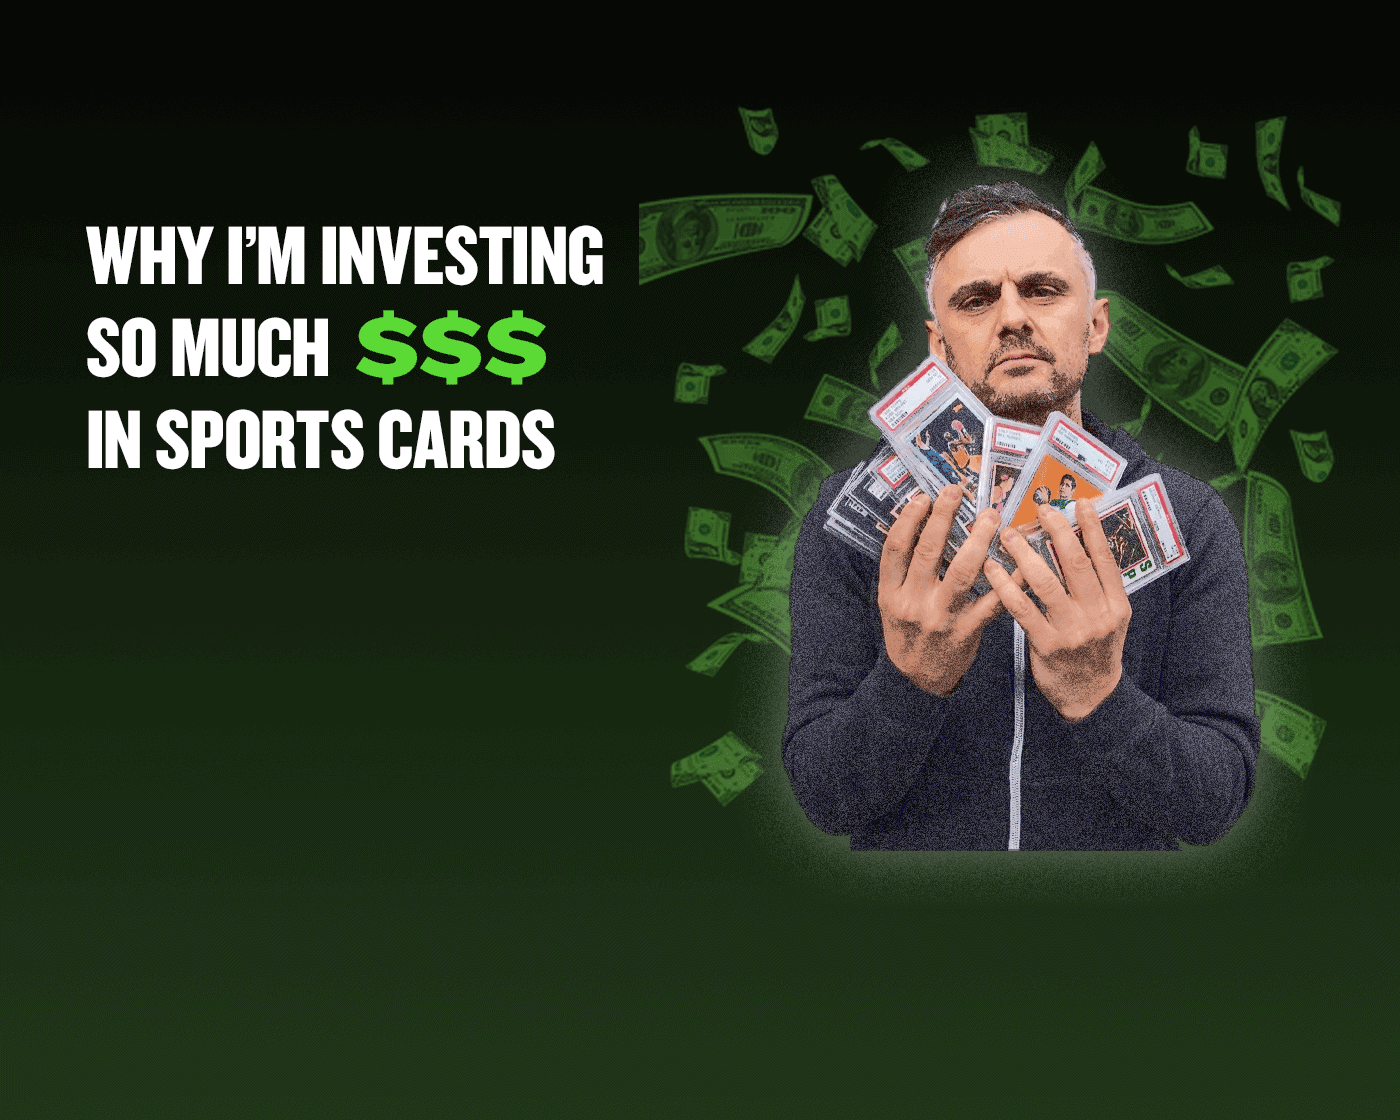 Why I’m Investing So Much Money In Sports Cards (Examples Included)